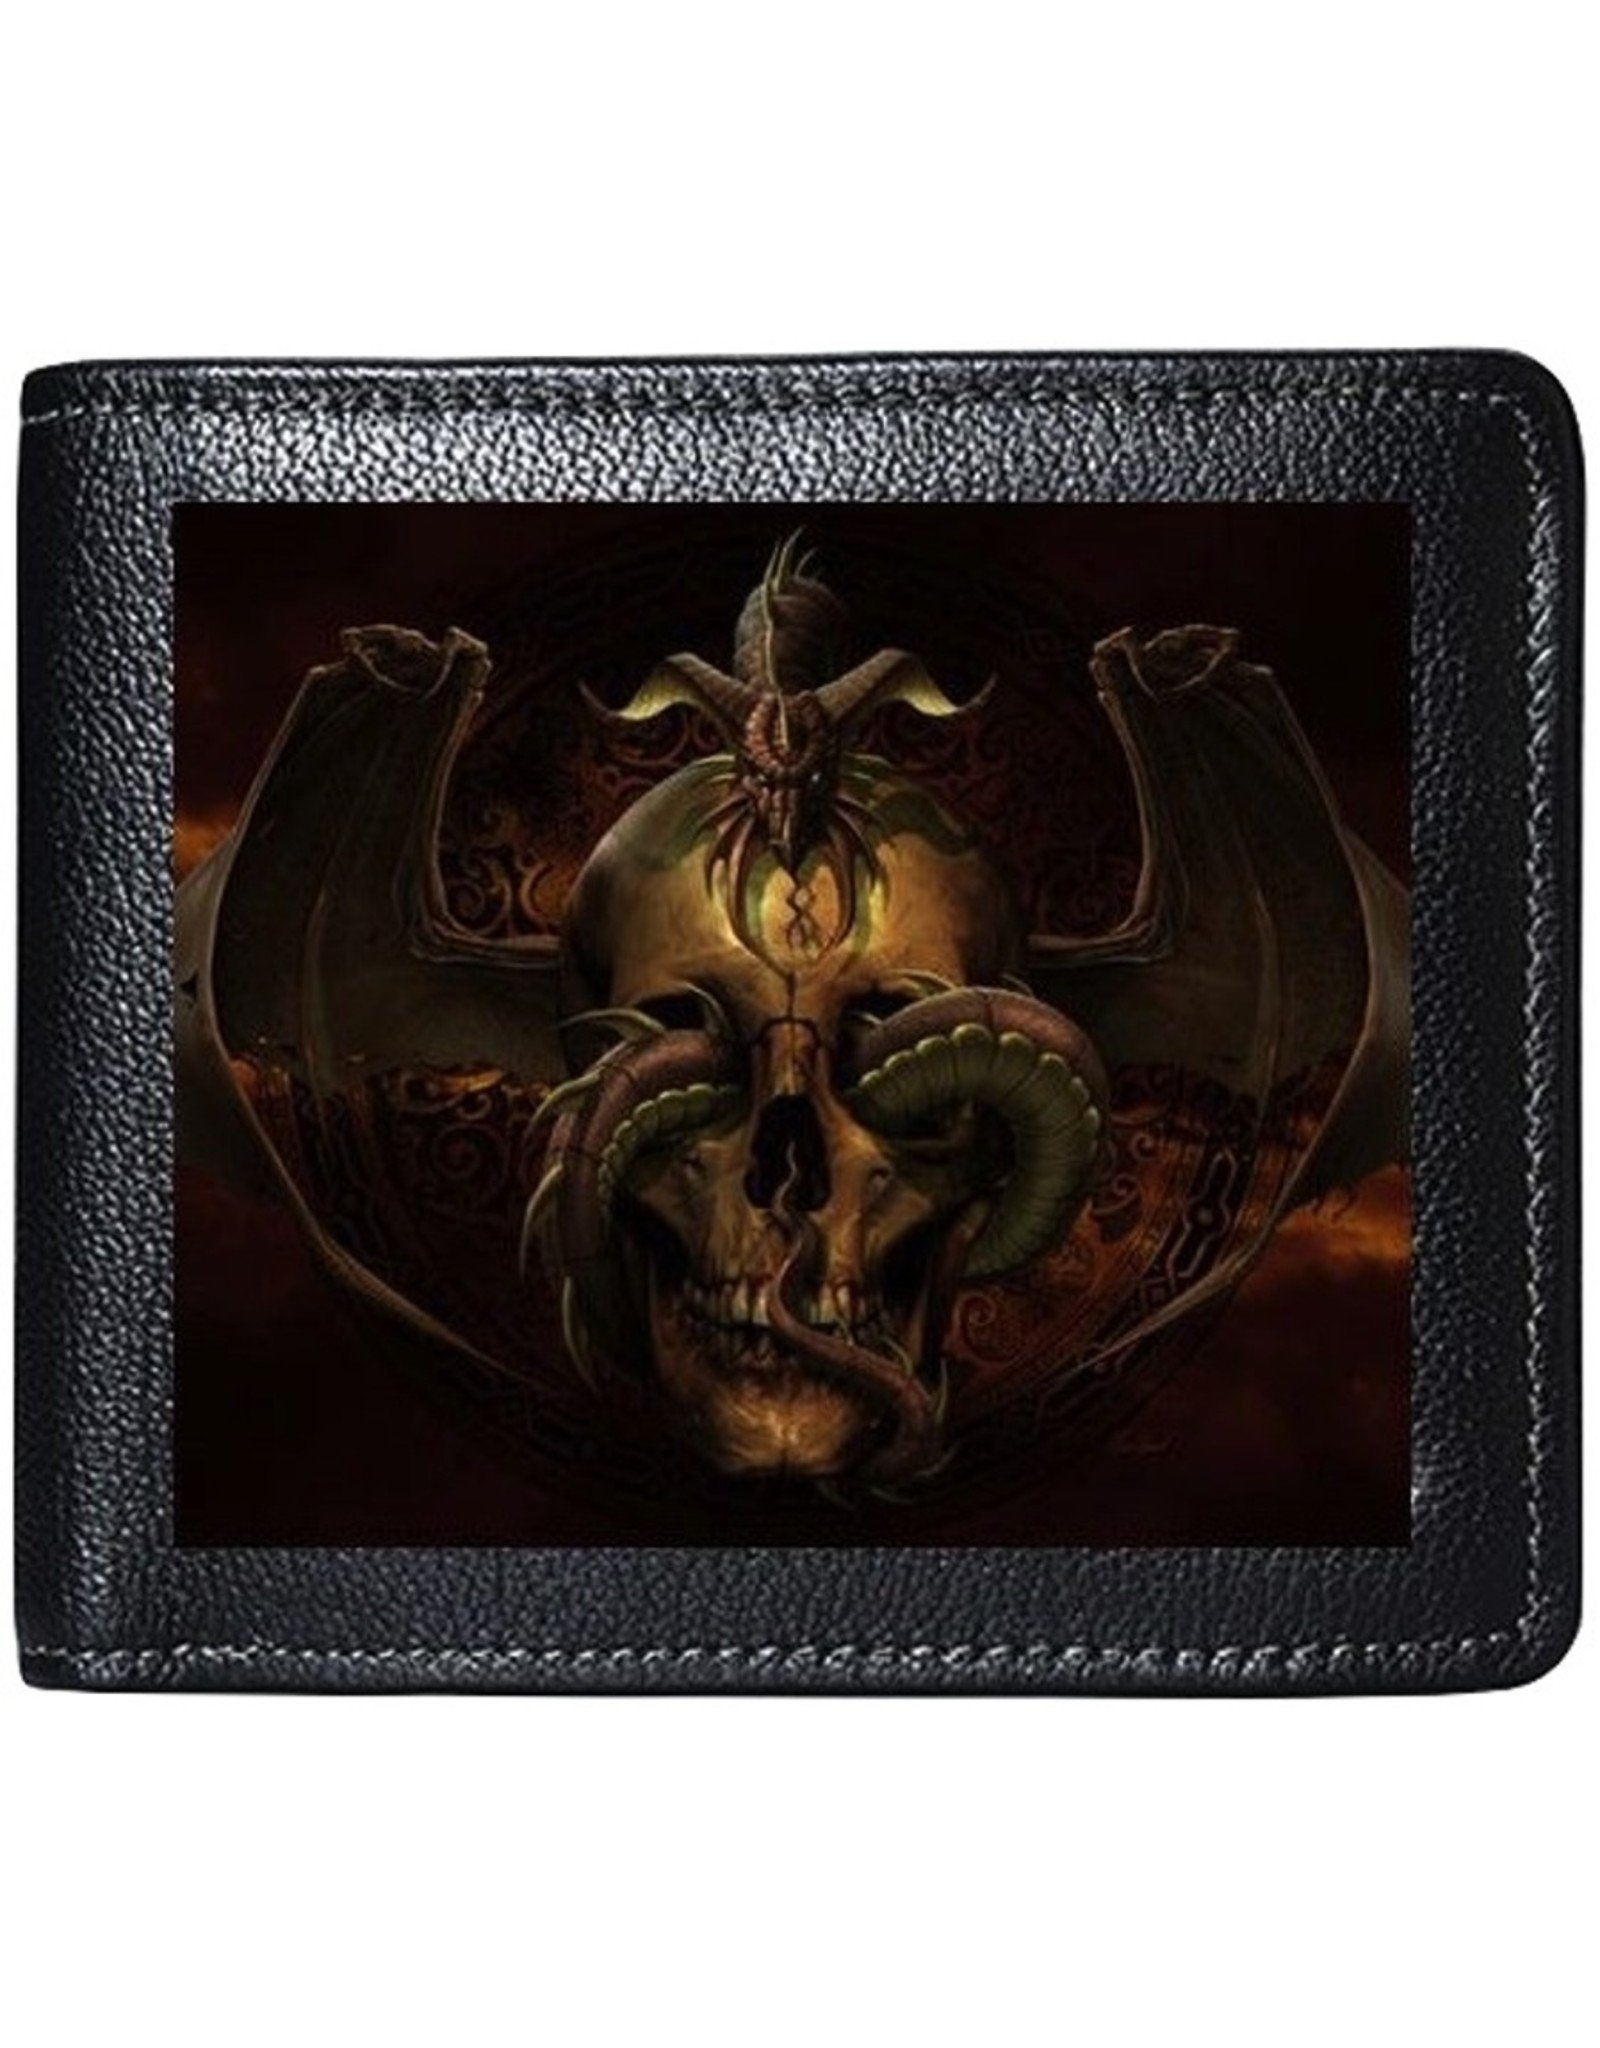 Tom Wood Gothic wallets and purses - Tom Wood Fantasy Art 3D lenticular wallet Dissent